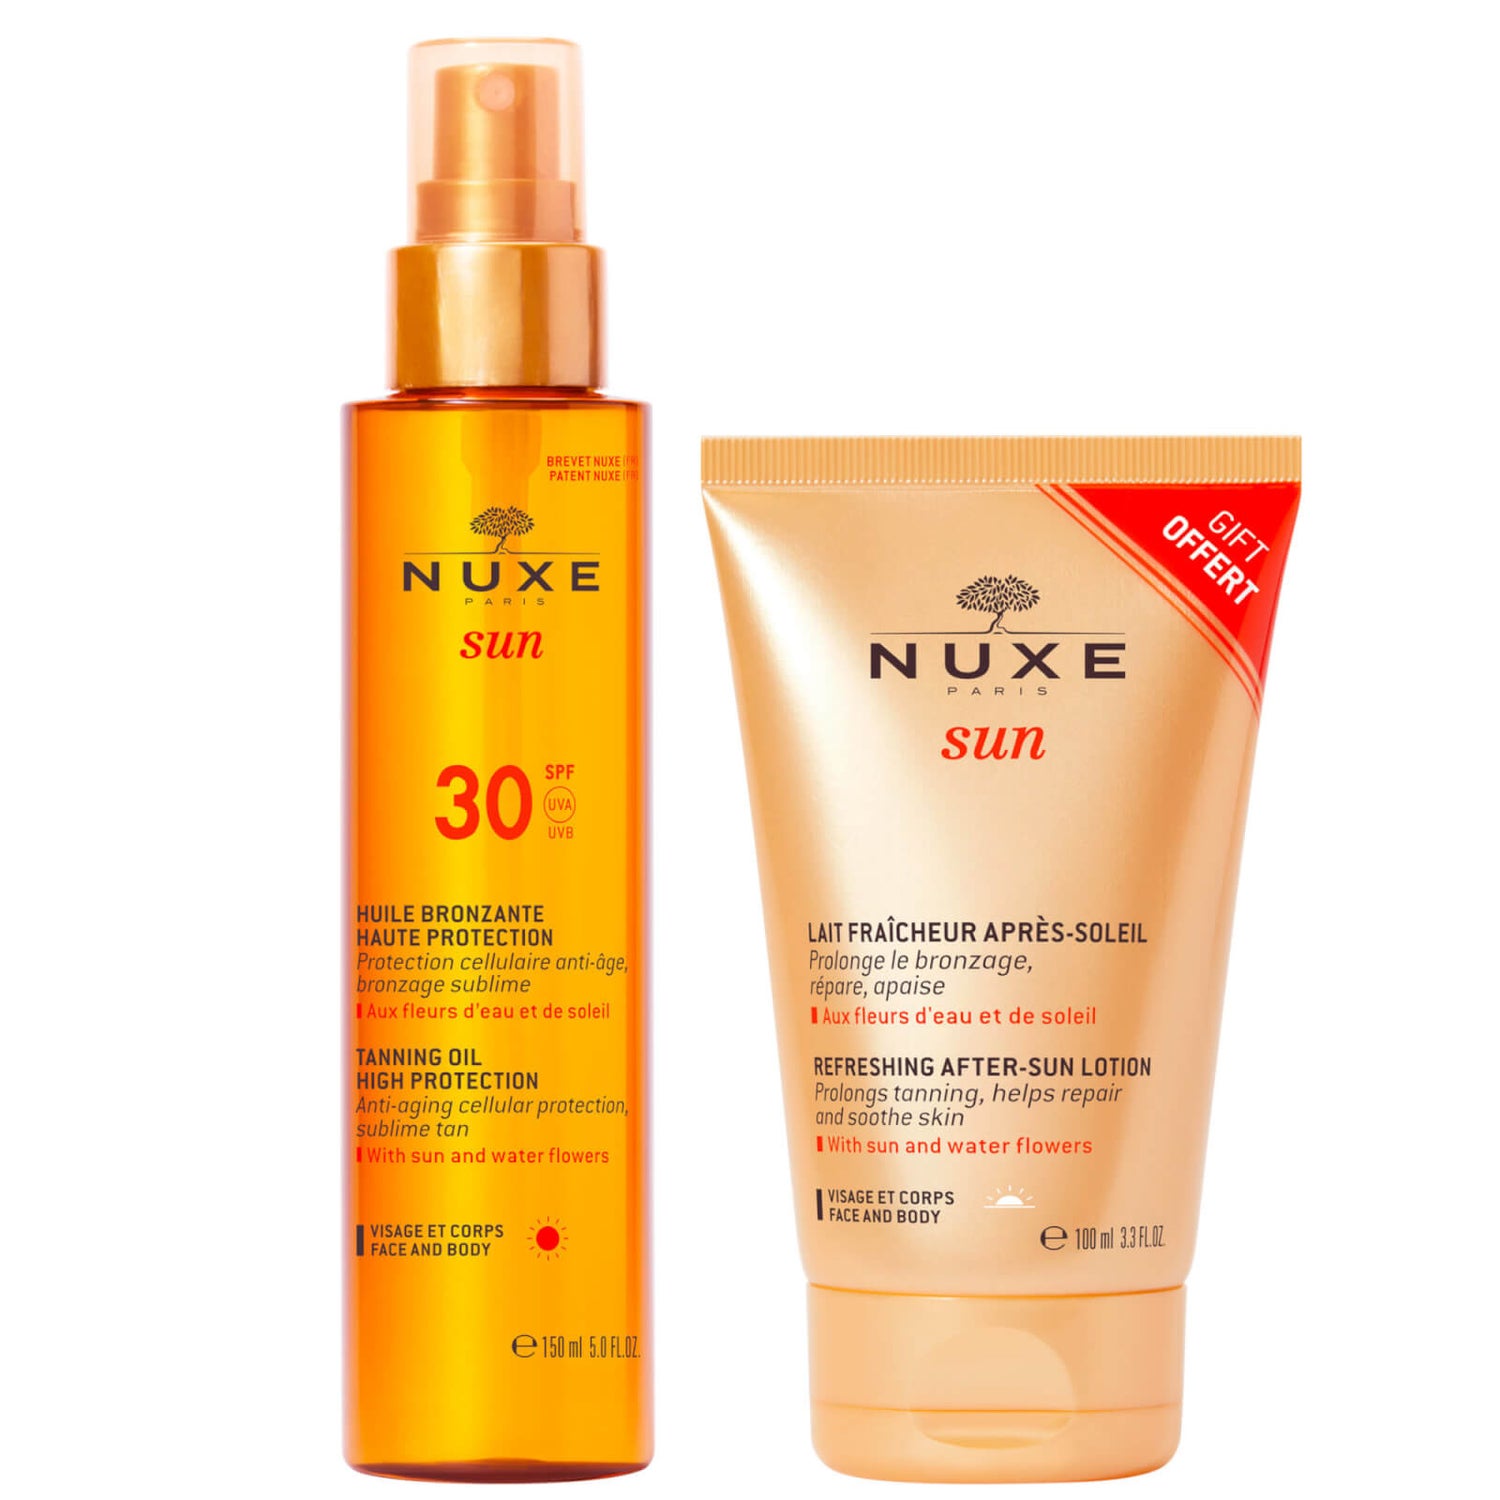 NUXE SPF30 Tanning Oil and Aftersun Set (Worth £28.25)